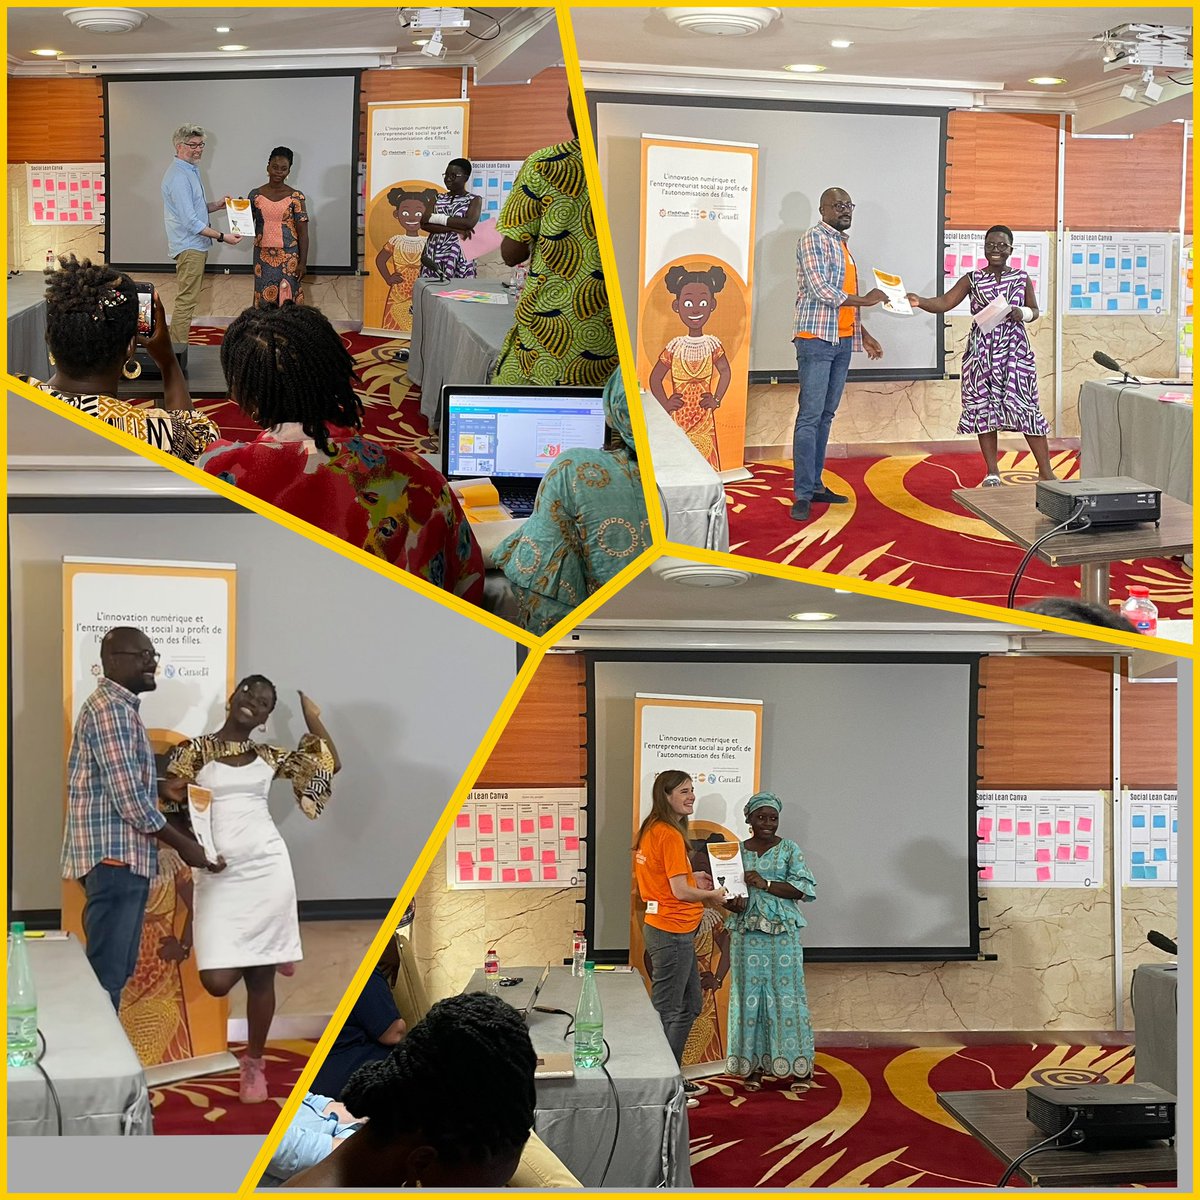 #Tech4Youth #Tech4Girls - Certification ceremony 👩🏽‍🎓🎉 for innovatively completed #MinimumViableProduct 💡🔝🚀

@unfpa_benin @UNFPA_WCARO @Nigina_Muntean @ITUDevelopment @UNFPAInnovation